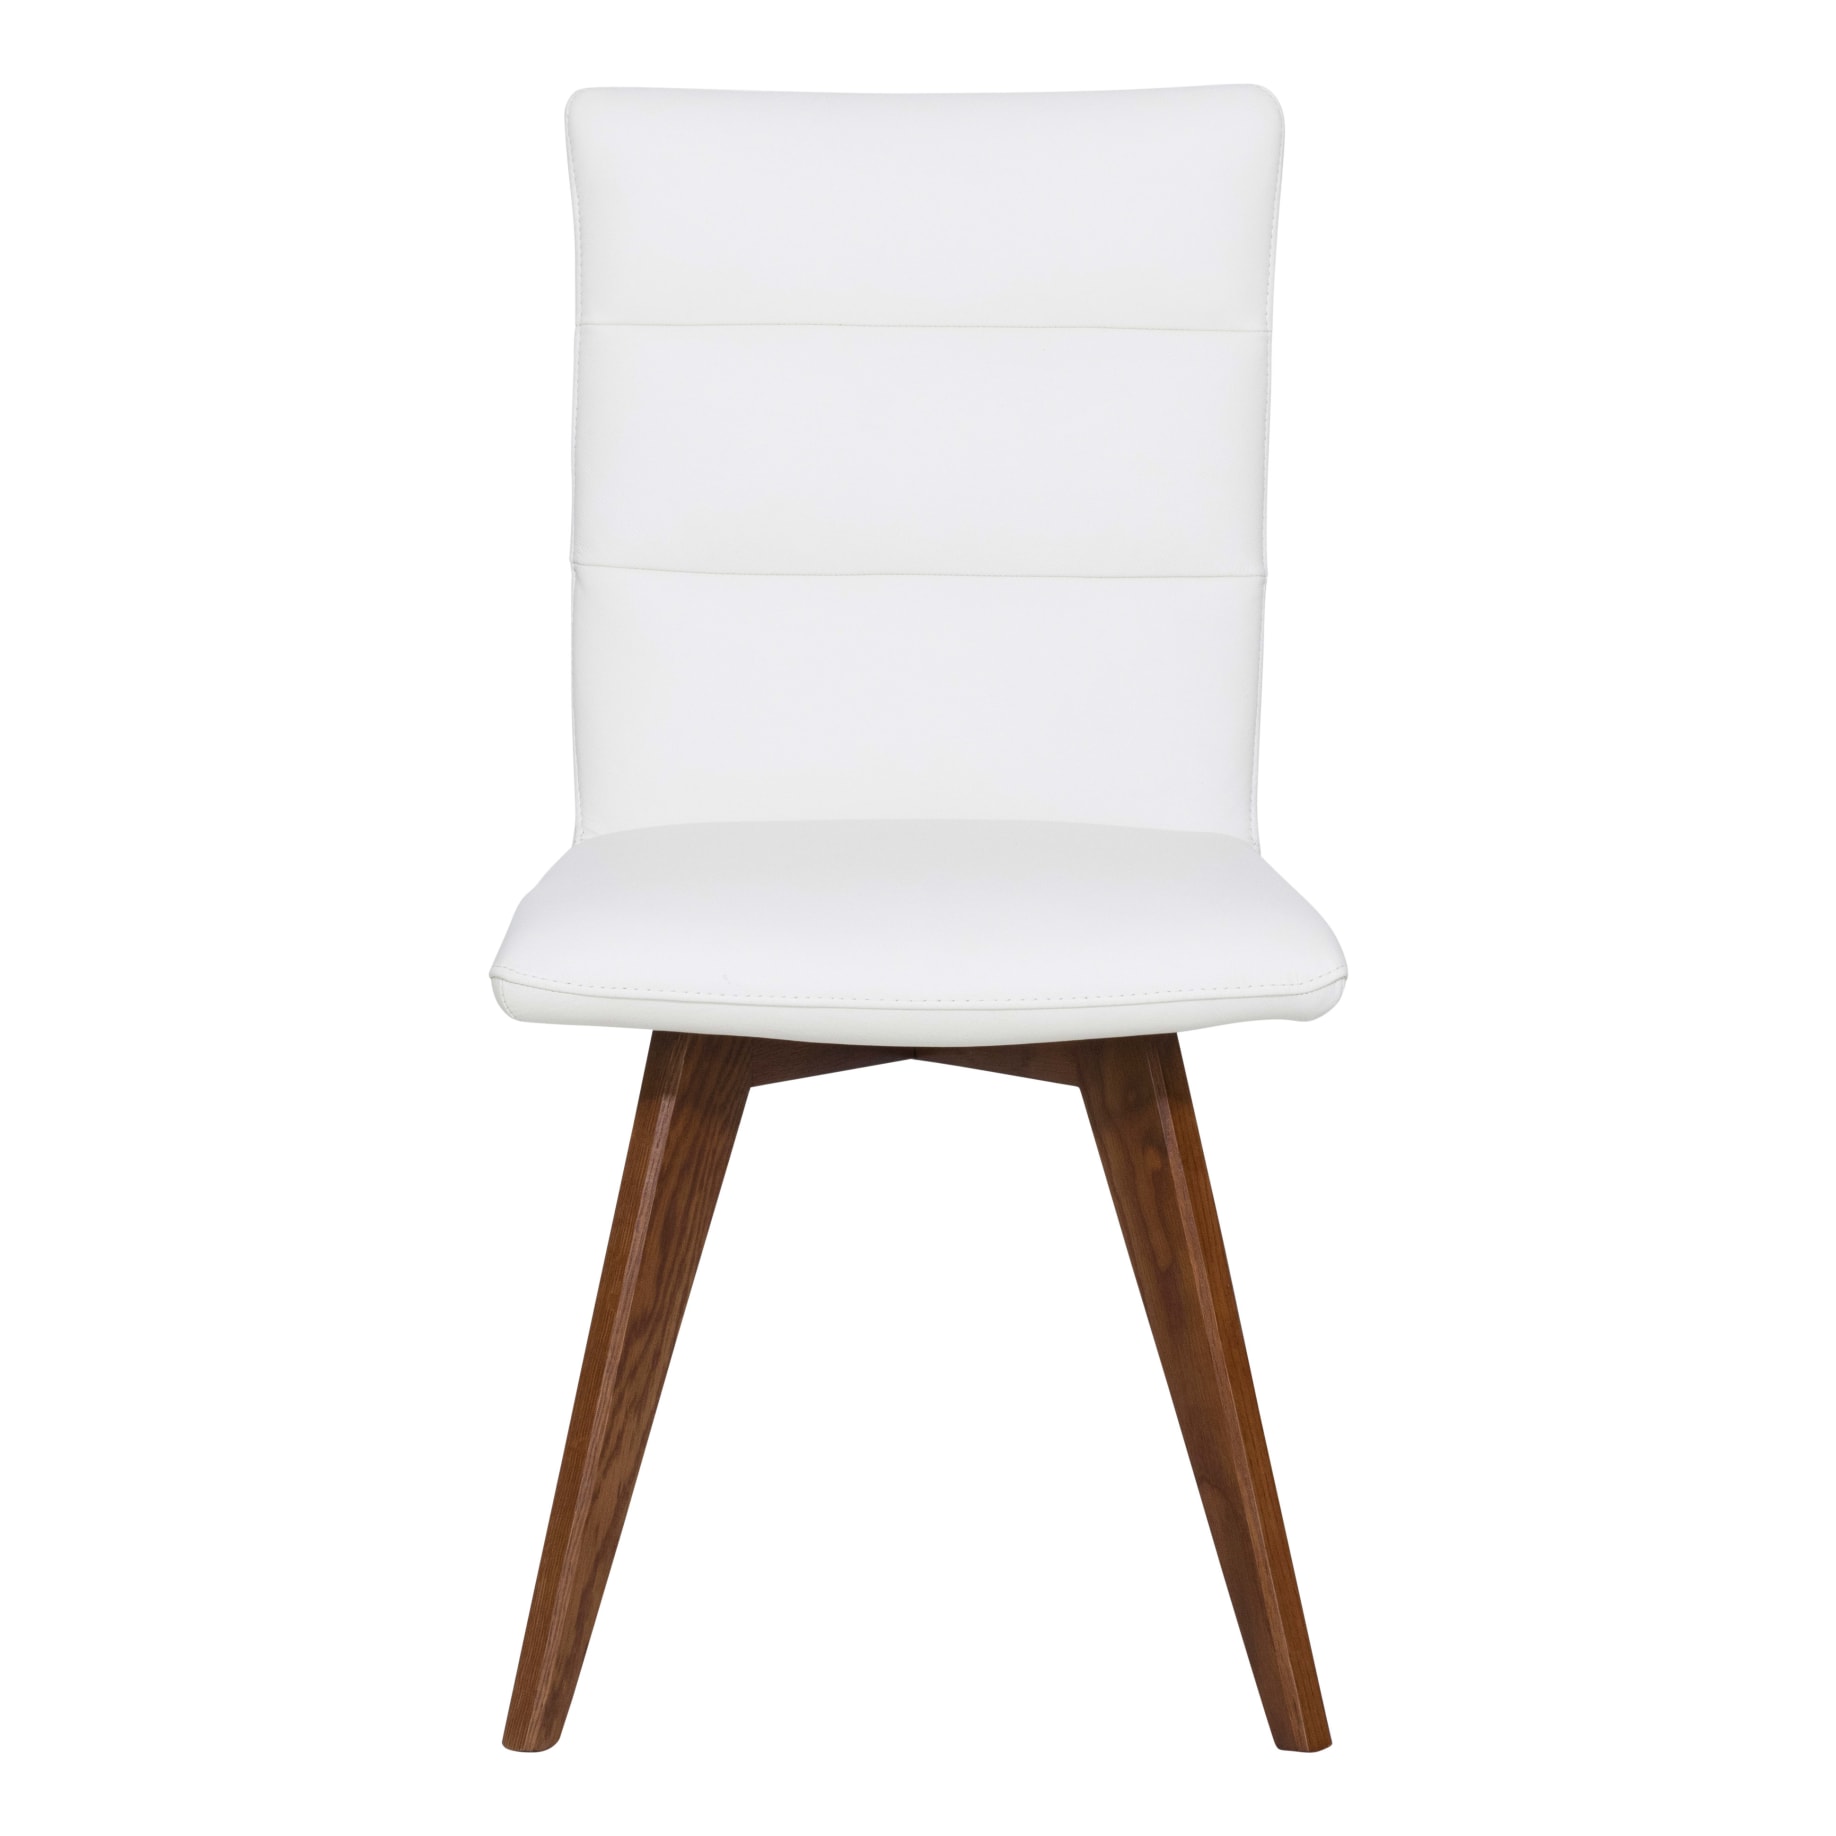 Hudson Dining Chair in Leather White / Blackwood Stain